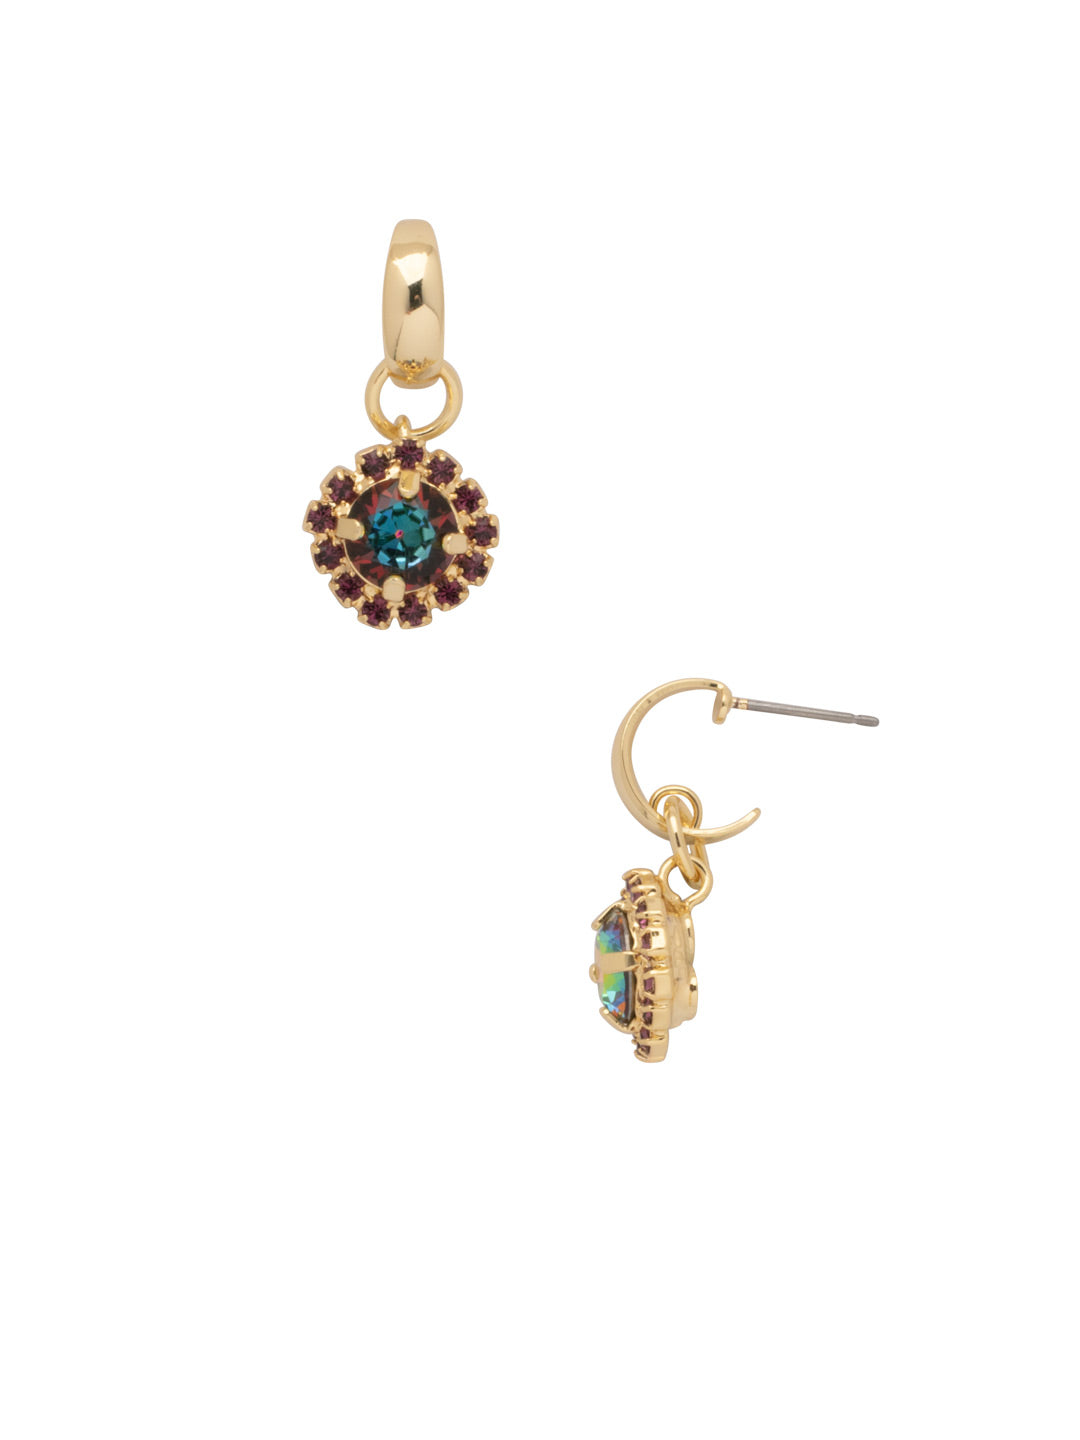 Haute Halo Huggie Dangle Earrings - EFK7BGVO - <p>The Haute Halo Huggie Dangle Earrings feature a round halo crystal dangling from a huggie hoop on a post. From Sorrelli's Volcano collection in our Bright Gold-tone finish.</p>